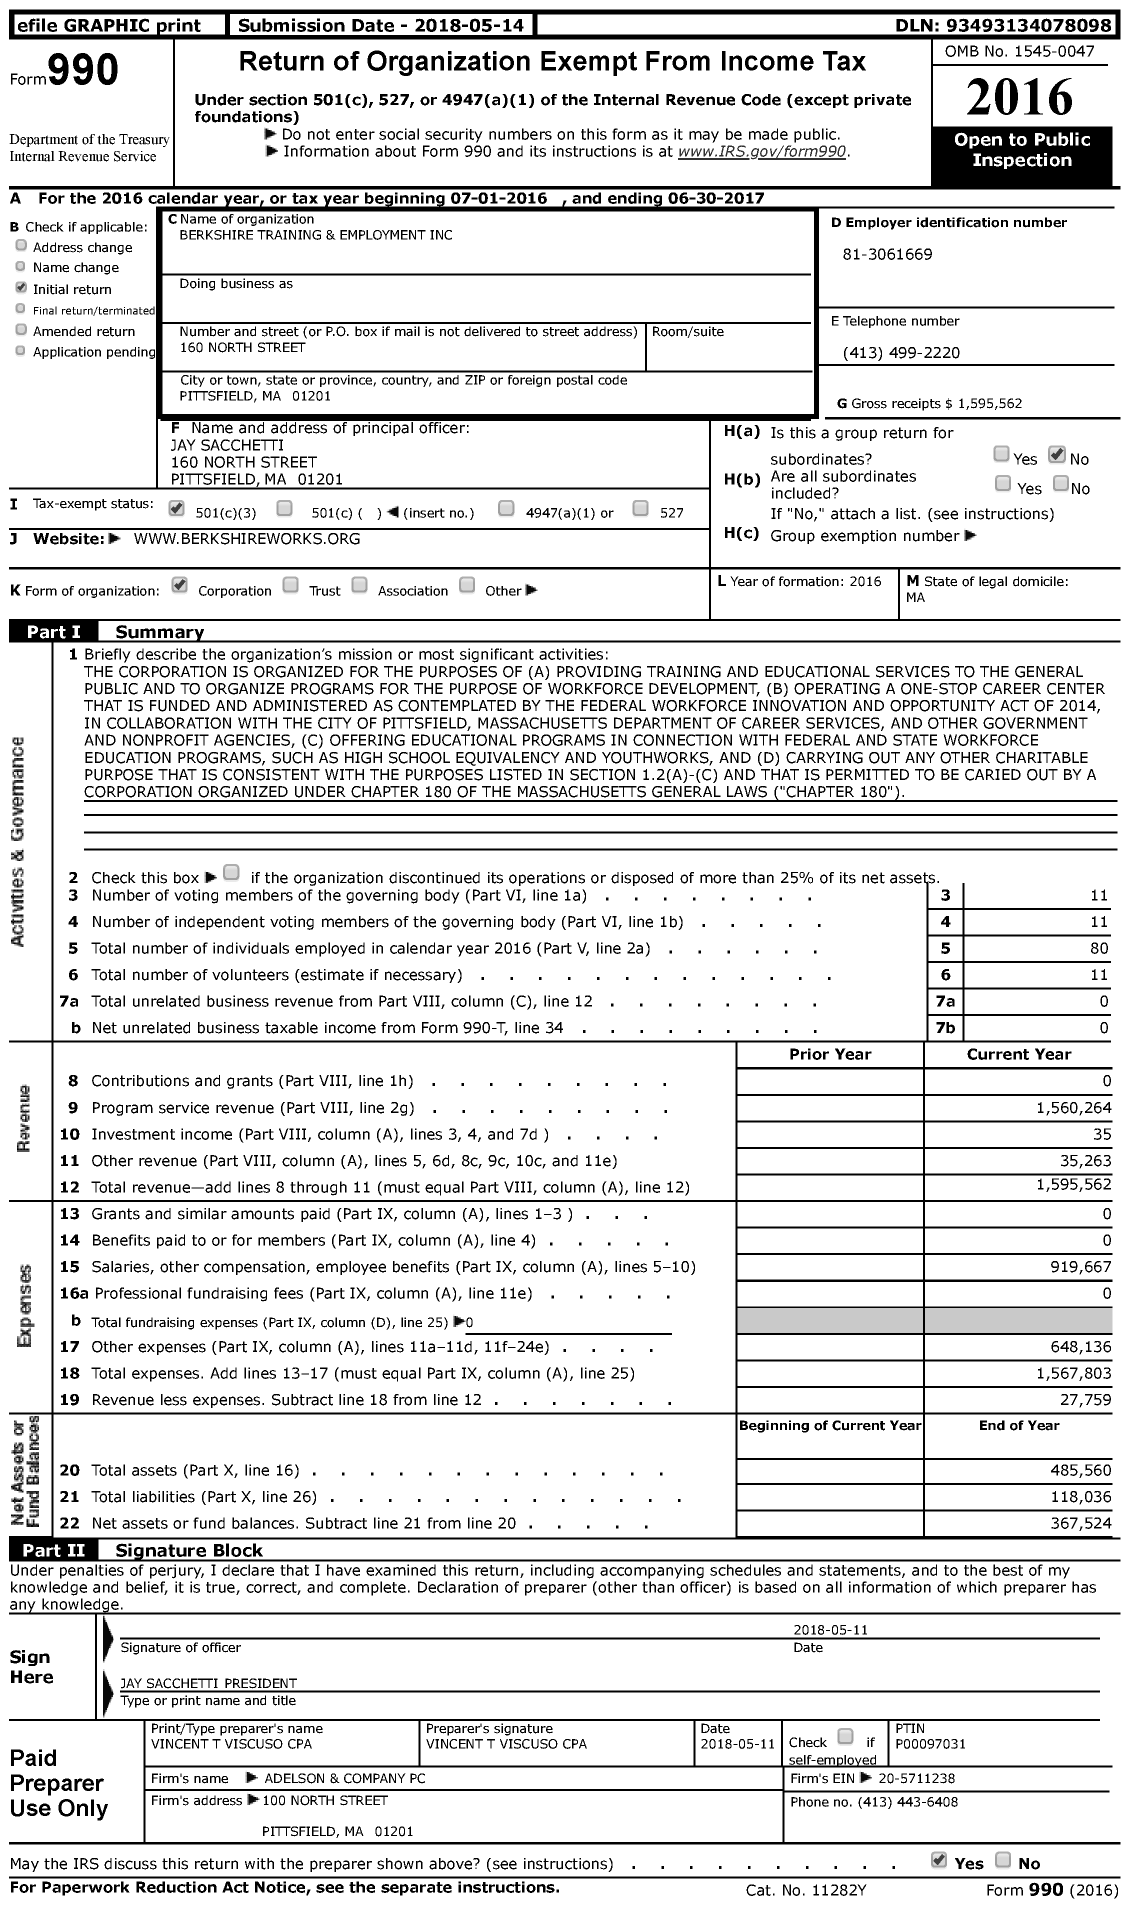 Image of first page of 2016 Form 990 for Berkshire Training and Employment